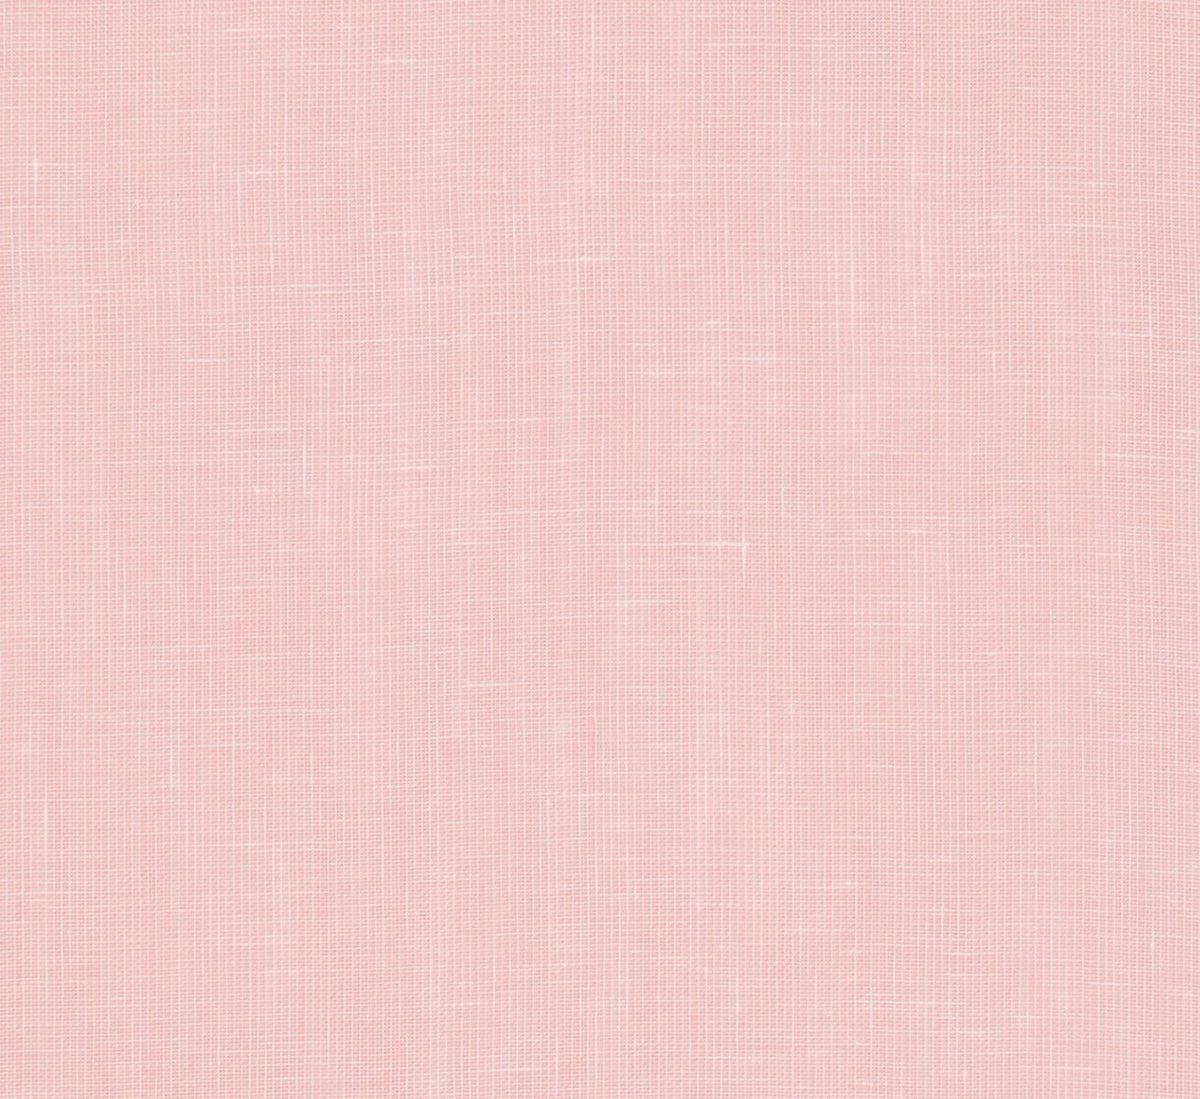 Day curtain pink uni linen